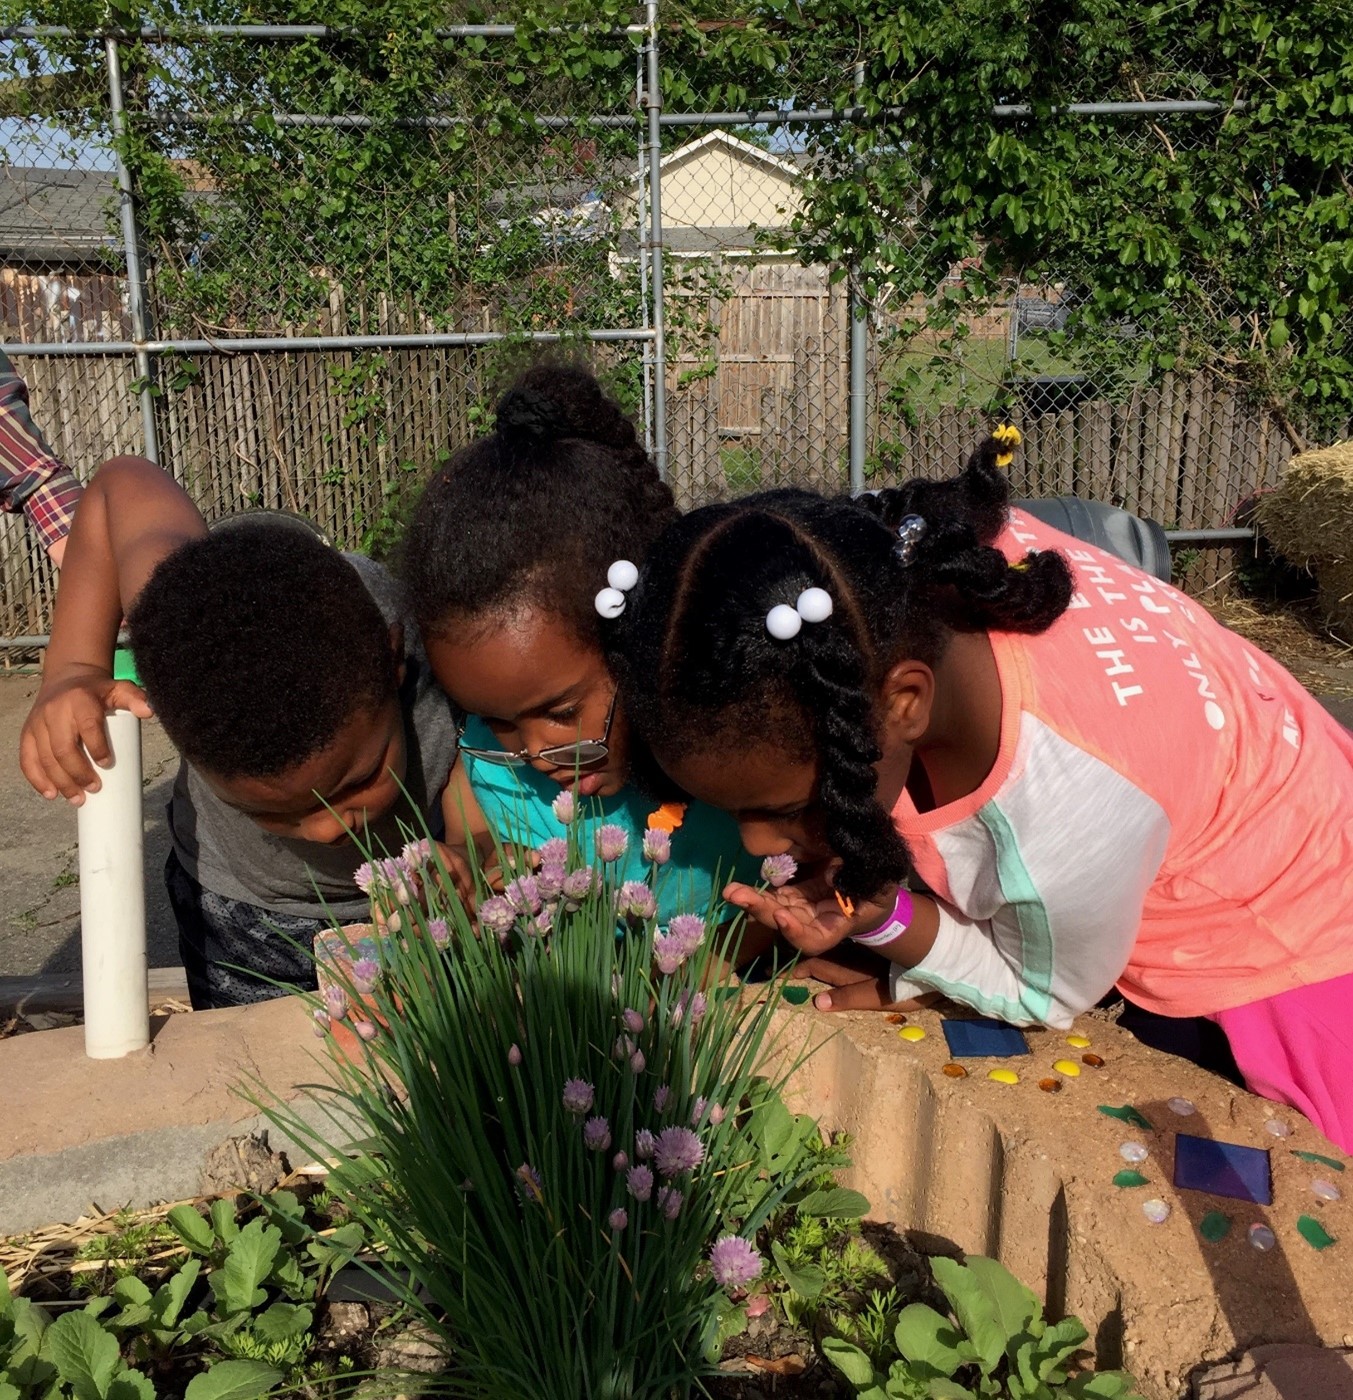 Three young children bent over a raised garden and closely inspecting a chives plant with purple flowers